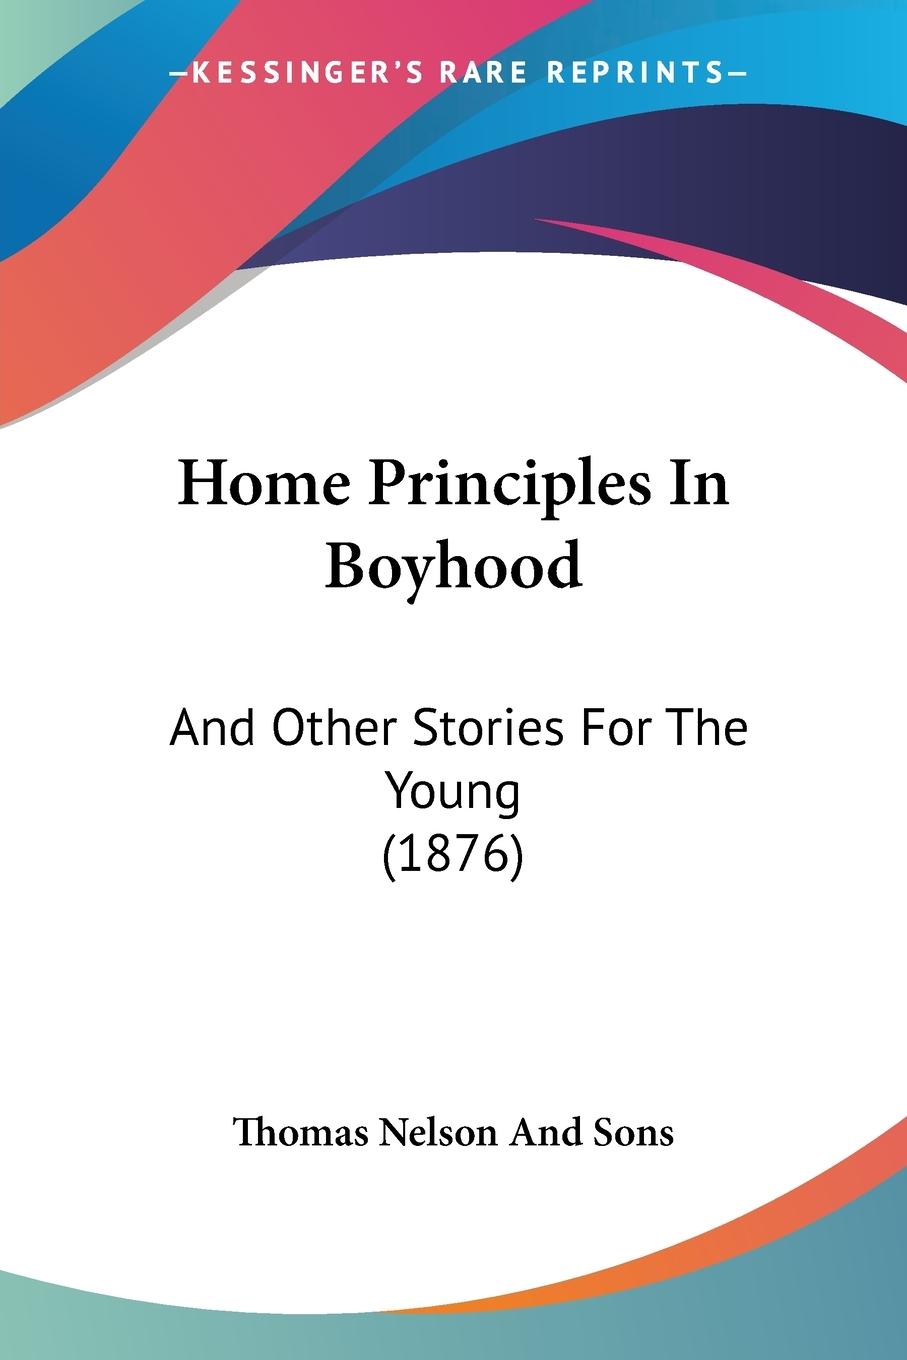 Home Principles In Boyhood - Thomas Nelson And Sons